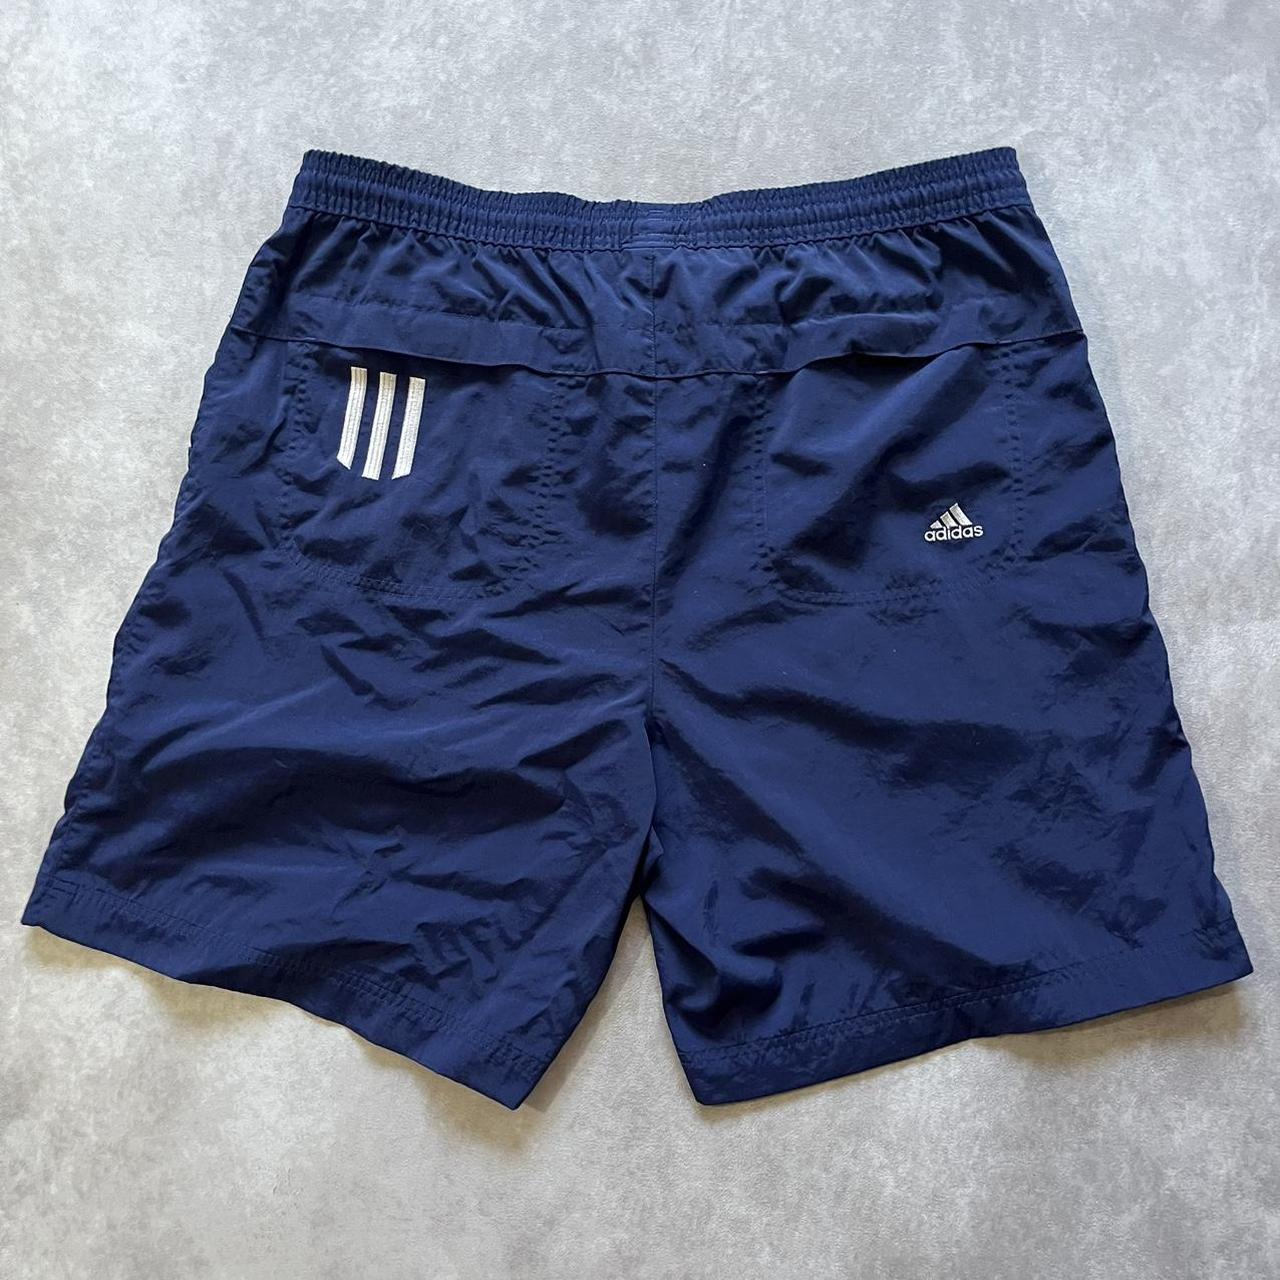 Vintage Adidas Navy Shorts ♻️ ABOUT THE ITMEN ♻️ •... - Depop